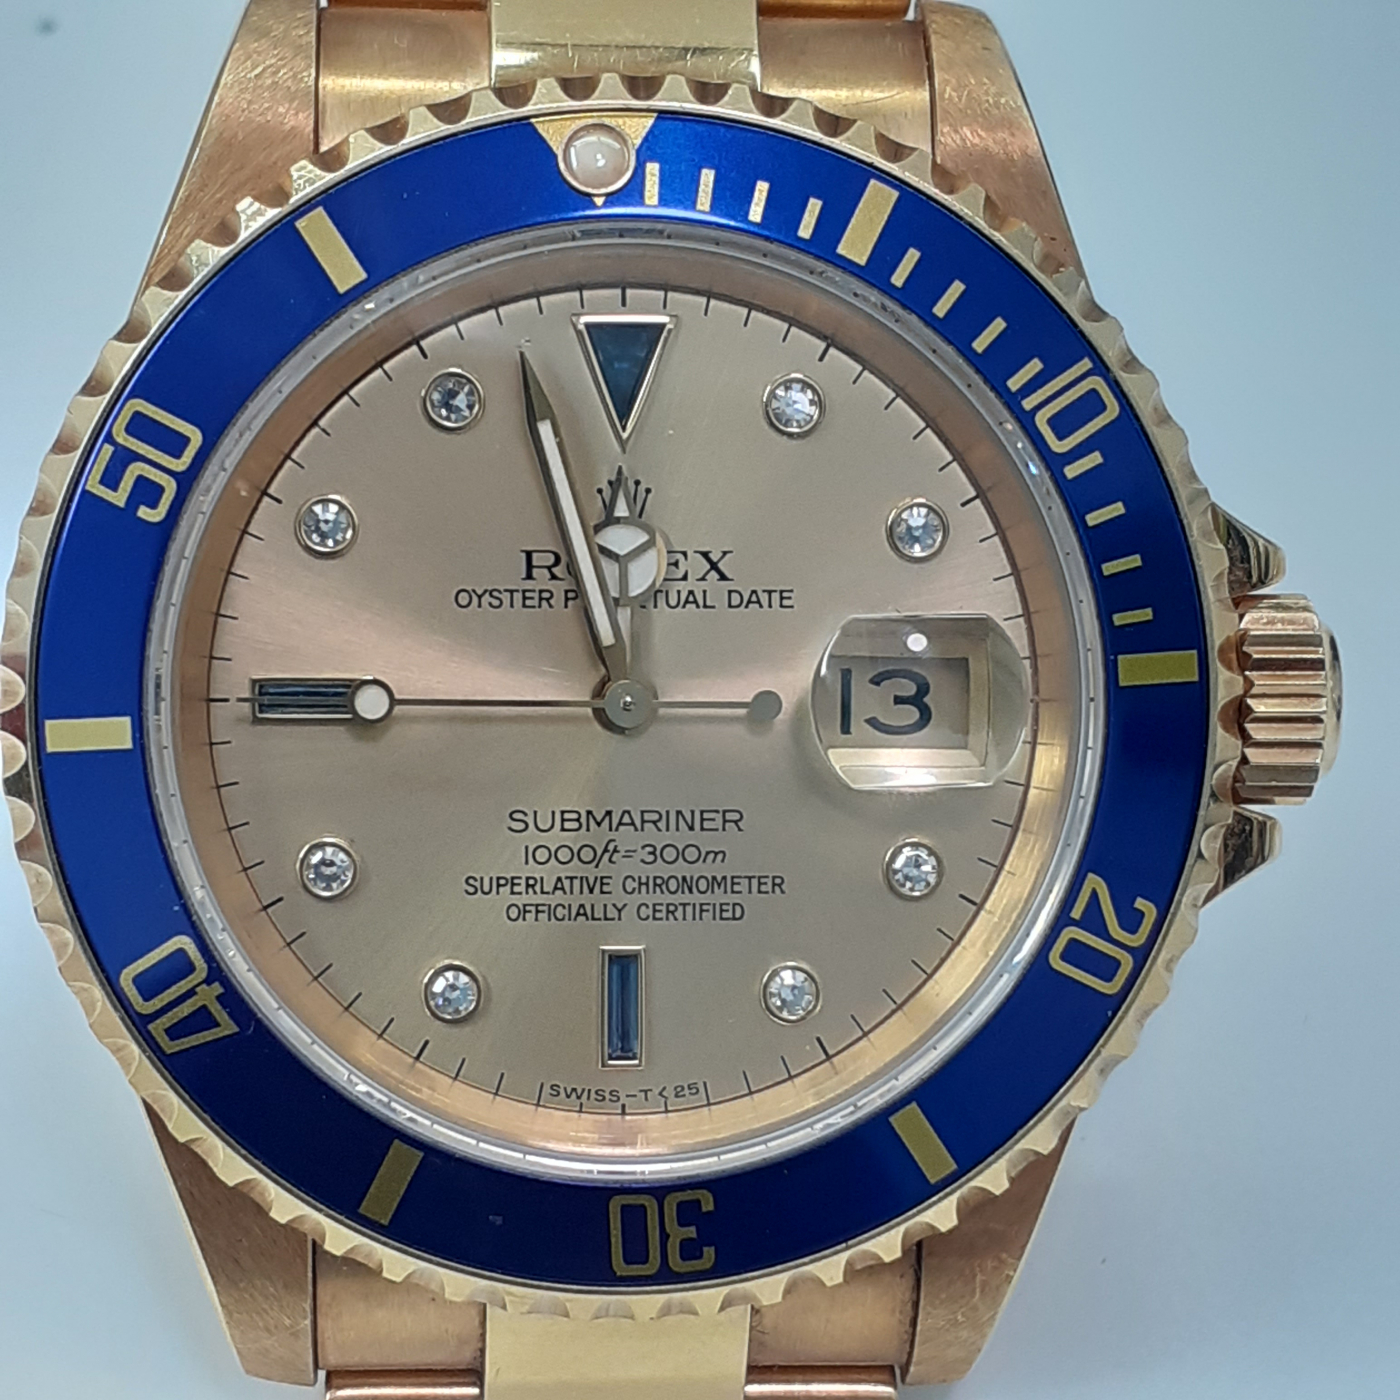 Rolex Submariner Sapphire Crystal NEVER POLISHED Serti Dial 16618